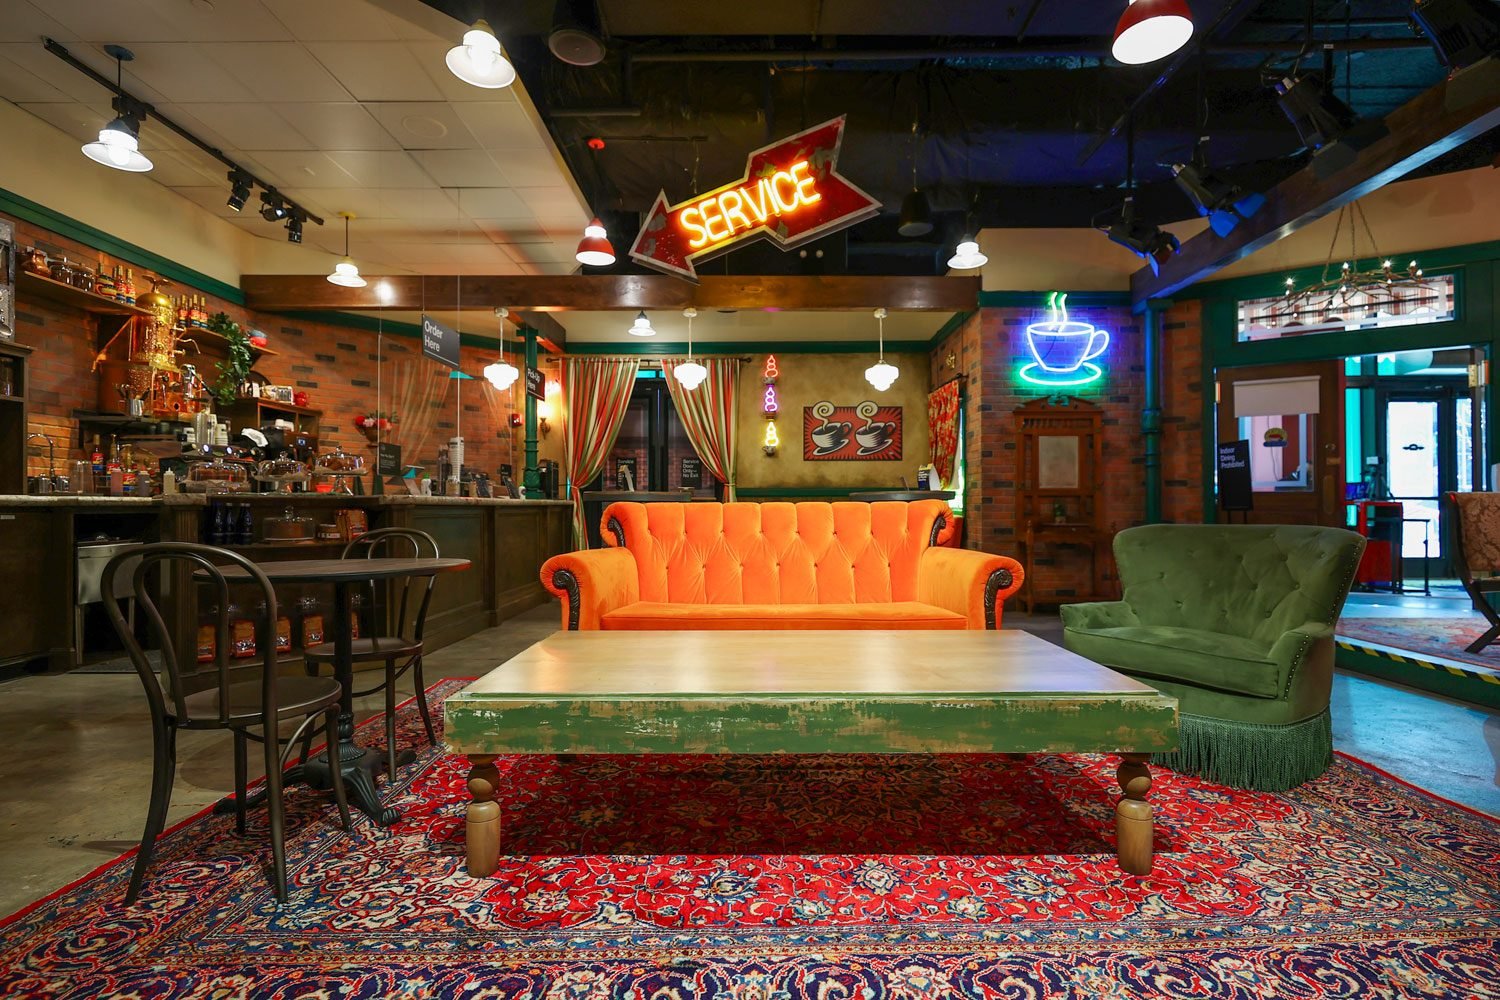 A Real Central Perk Cafe Is Now Open and 'Friends' Fans Need to Visit